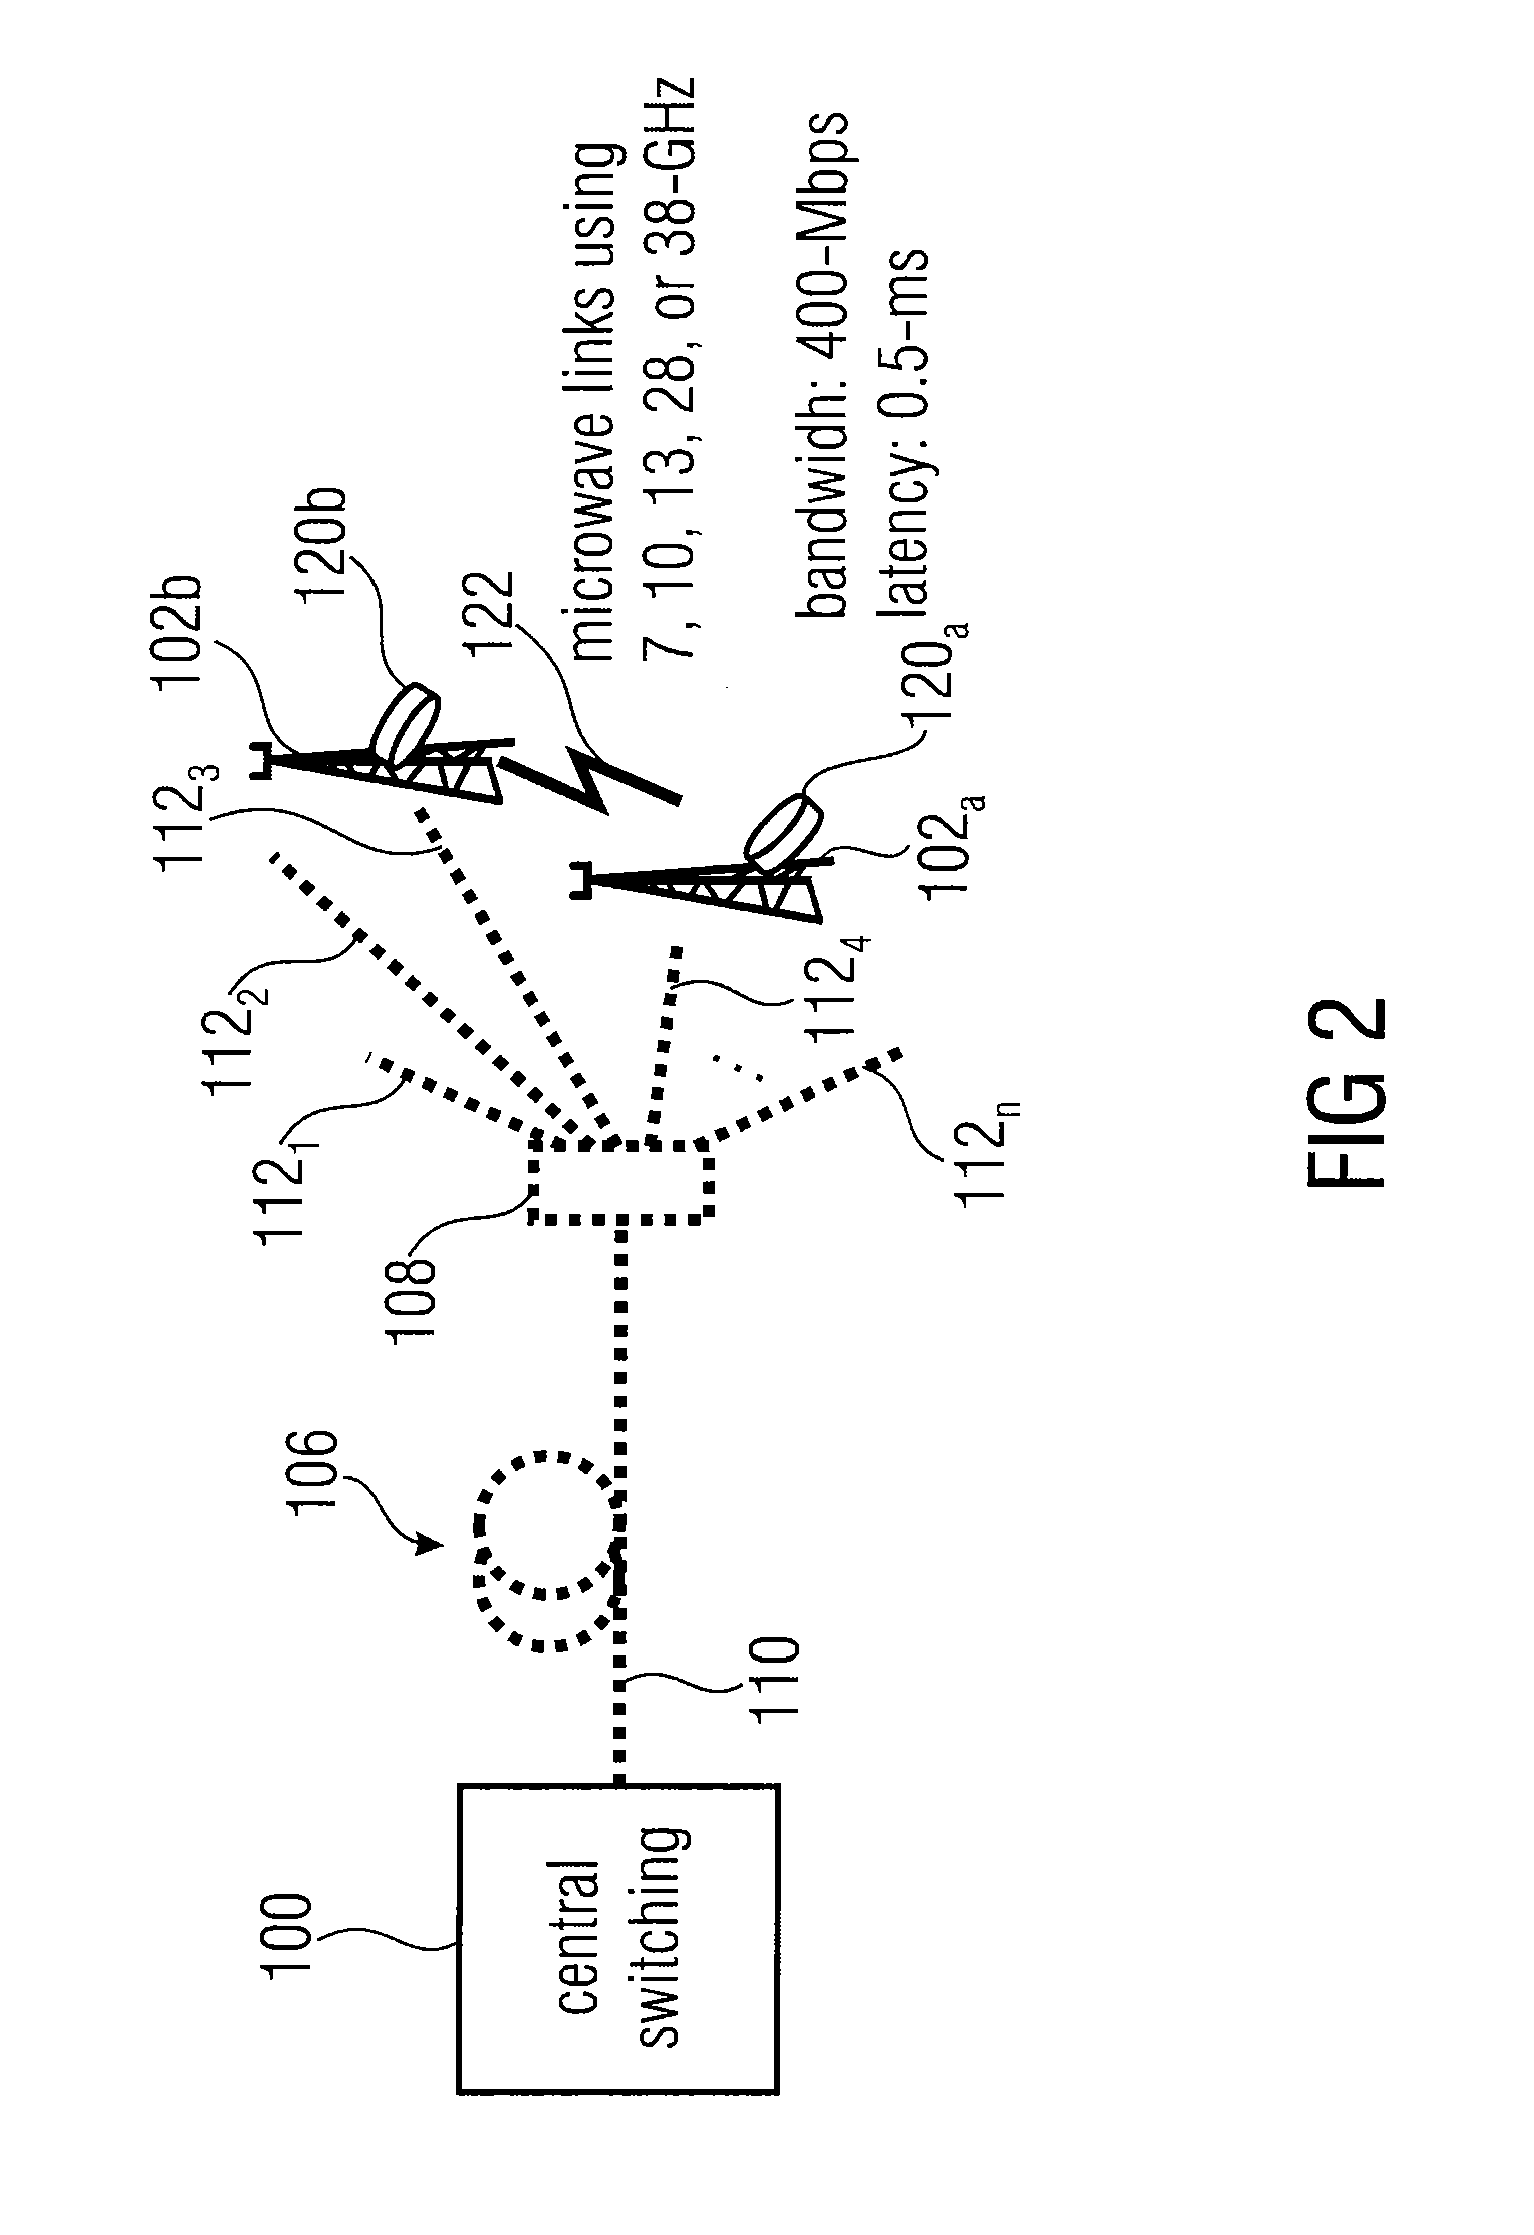 Communication system and method for directly transmitting signals between nodes of a communication system